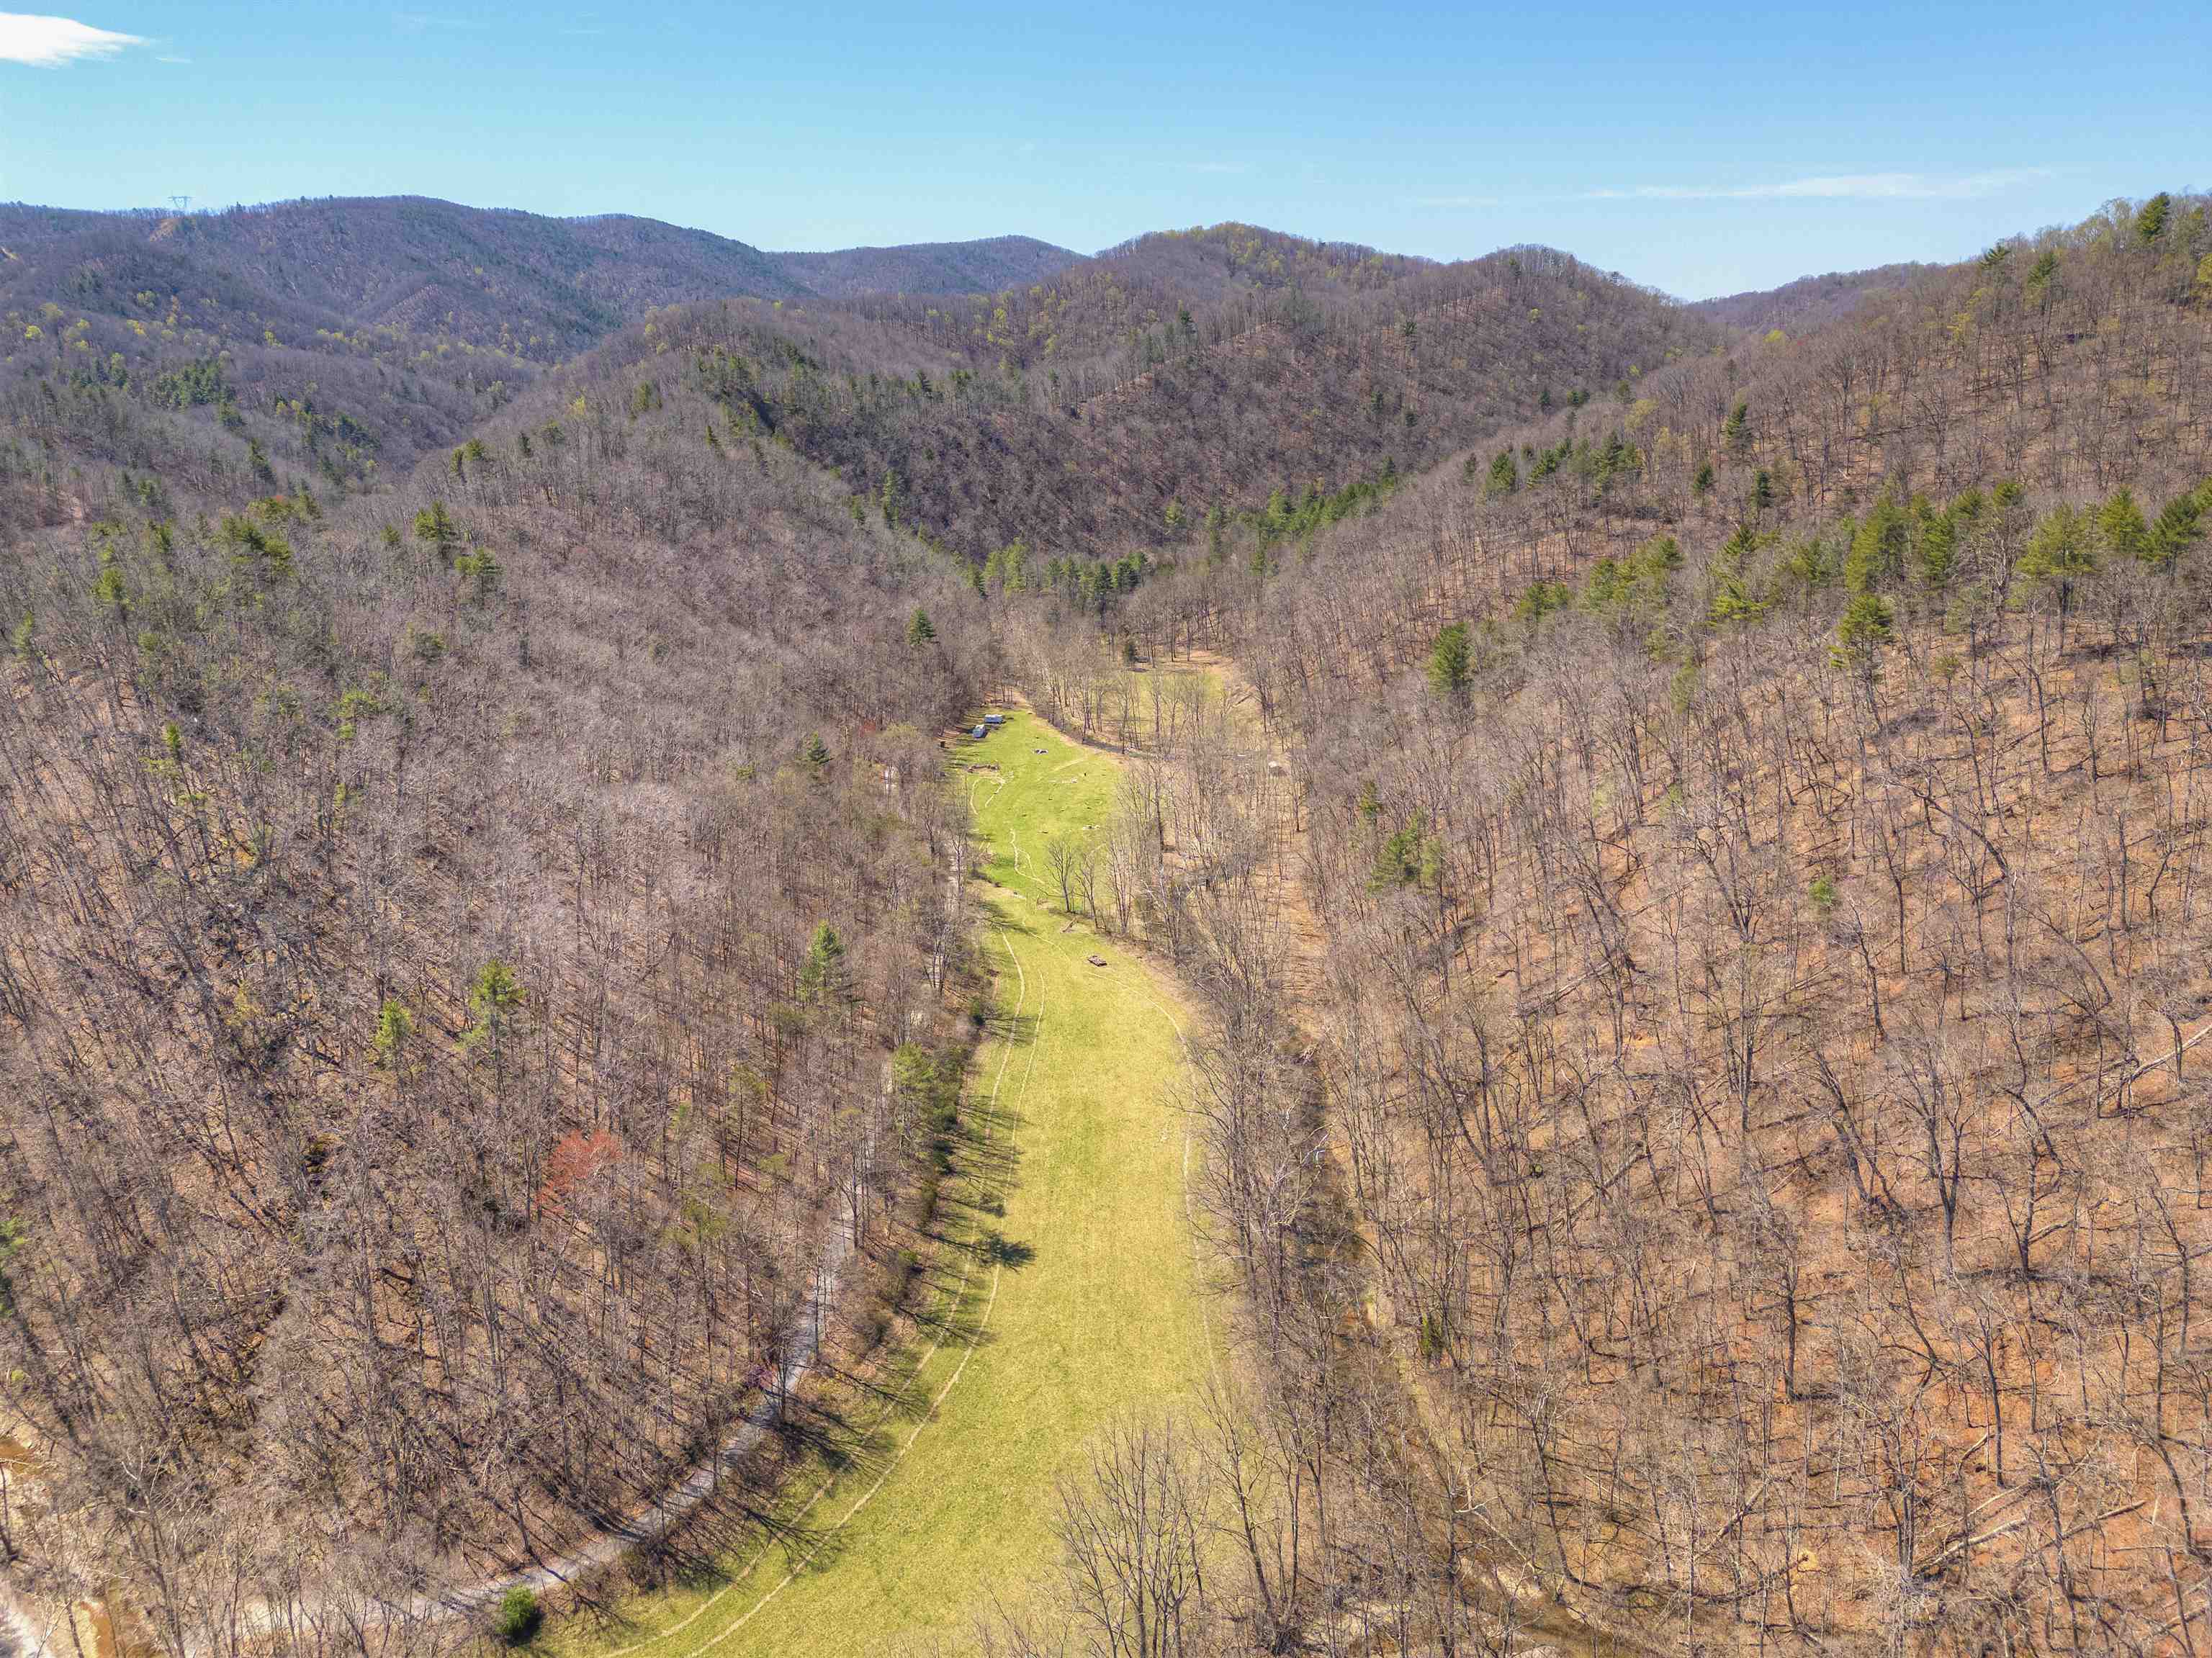 Fabulous opportunity to own 135.12 acres of land for hunting,  recreation or even the chance to build a home / cabin for a true private retreat! The wildlife is abundant and the property offers the ultimate landscape for the outdoor enthusiasts. Running through the middle of the property is approx 9.8 acres +/- of flat land which is also very suitable pasture for horses, cattle or any livestock. Partially fenced in. The remainder of the property is mostly wooded with varying elevations. Elliott Creek runs through the property in multiple locations.  Some very mature Timber also exists. Access to this property is off of Craigs Mountain Rd which is maintained by VDOT. No formal survey available or recorded. Multiple adjoining parcels are surveyed. Situated just 15 minutes from the town of Christiansburg, I 81, and most amenities, this is a rare find! If you are looking for a great get-away, hunting paradise or a private homestead , this may be the perfect property for you !